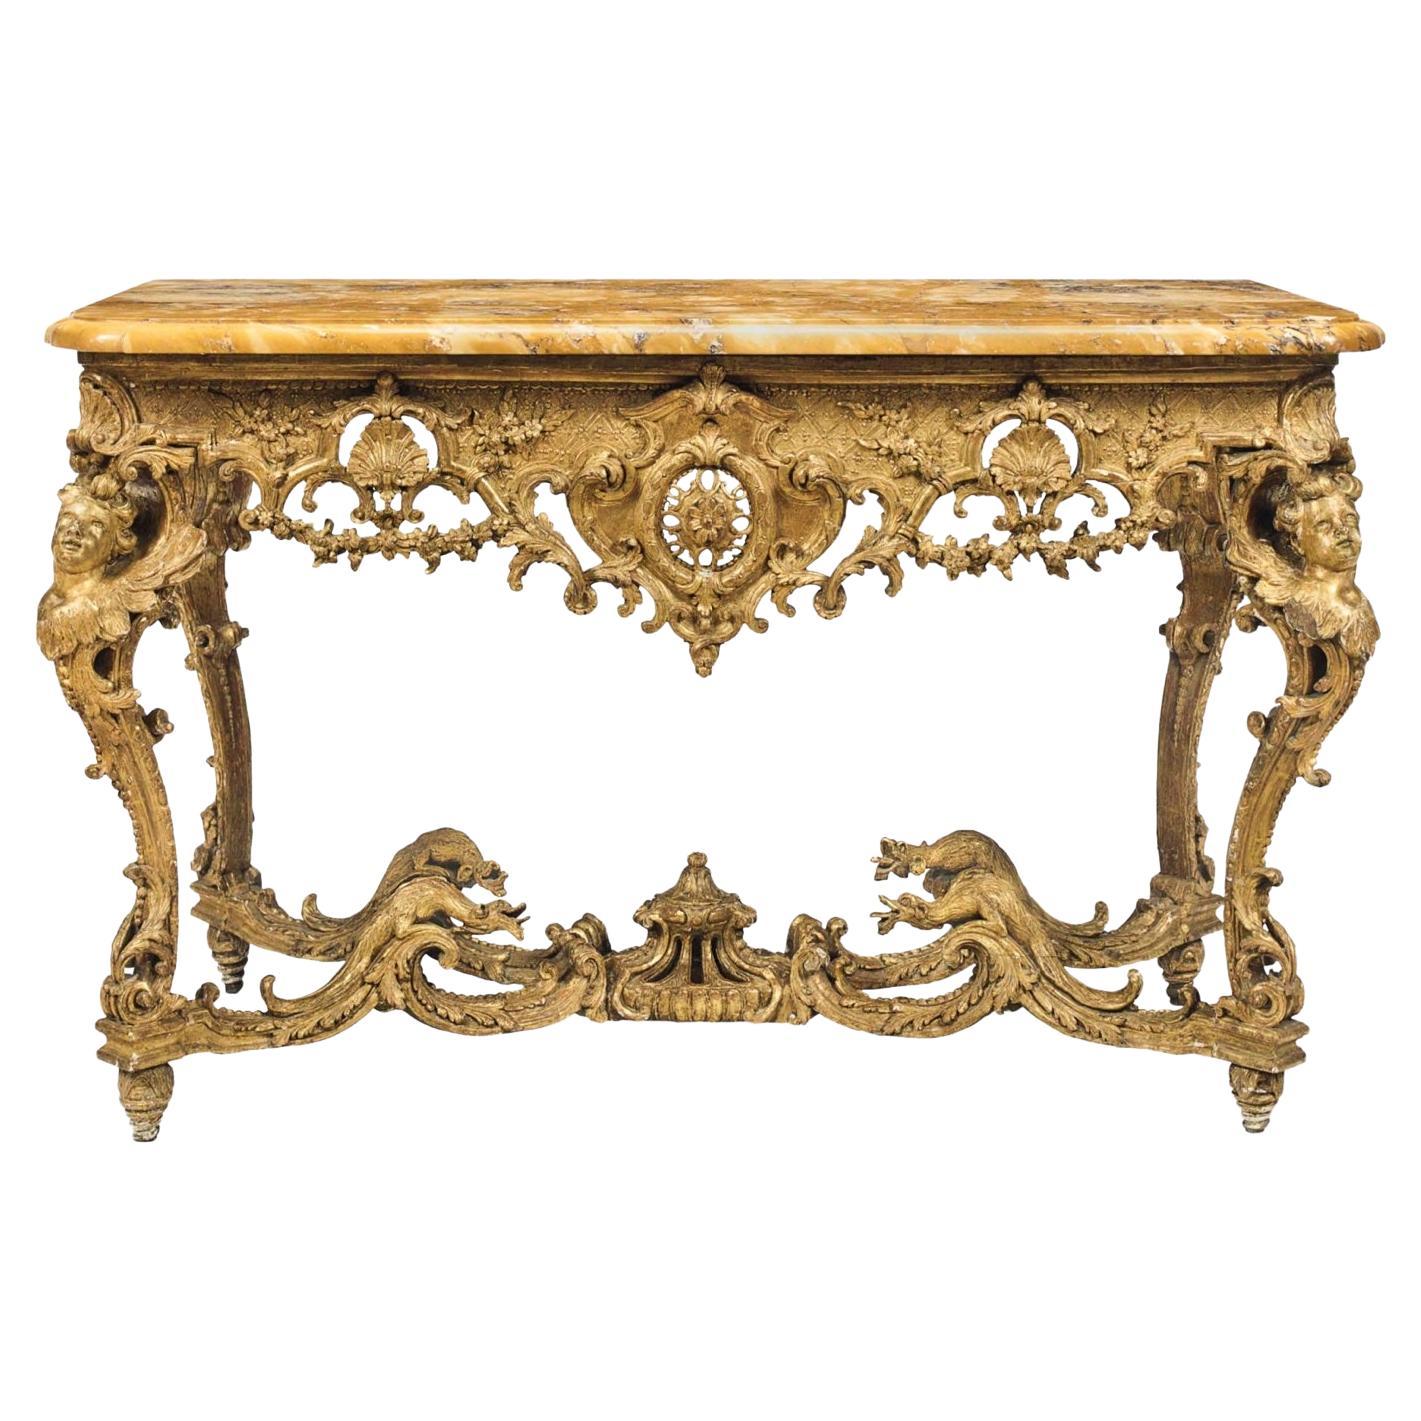 18th Century Régence Period Giltwood and Sienna Marble Console, circa 1720-1725 For Sale